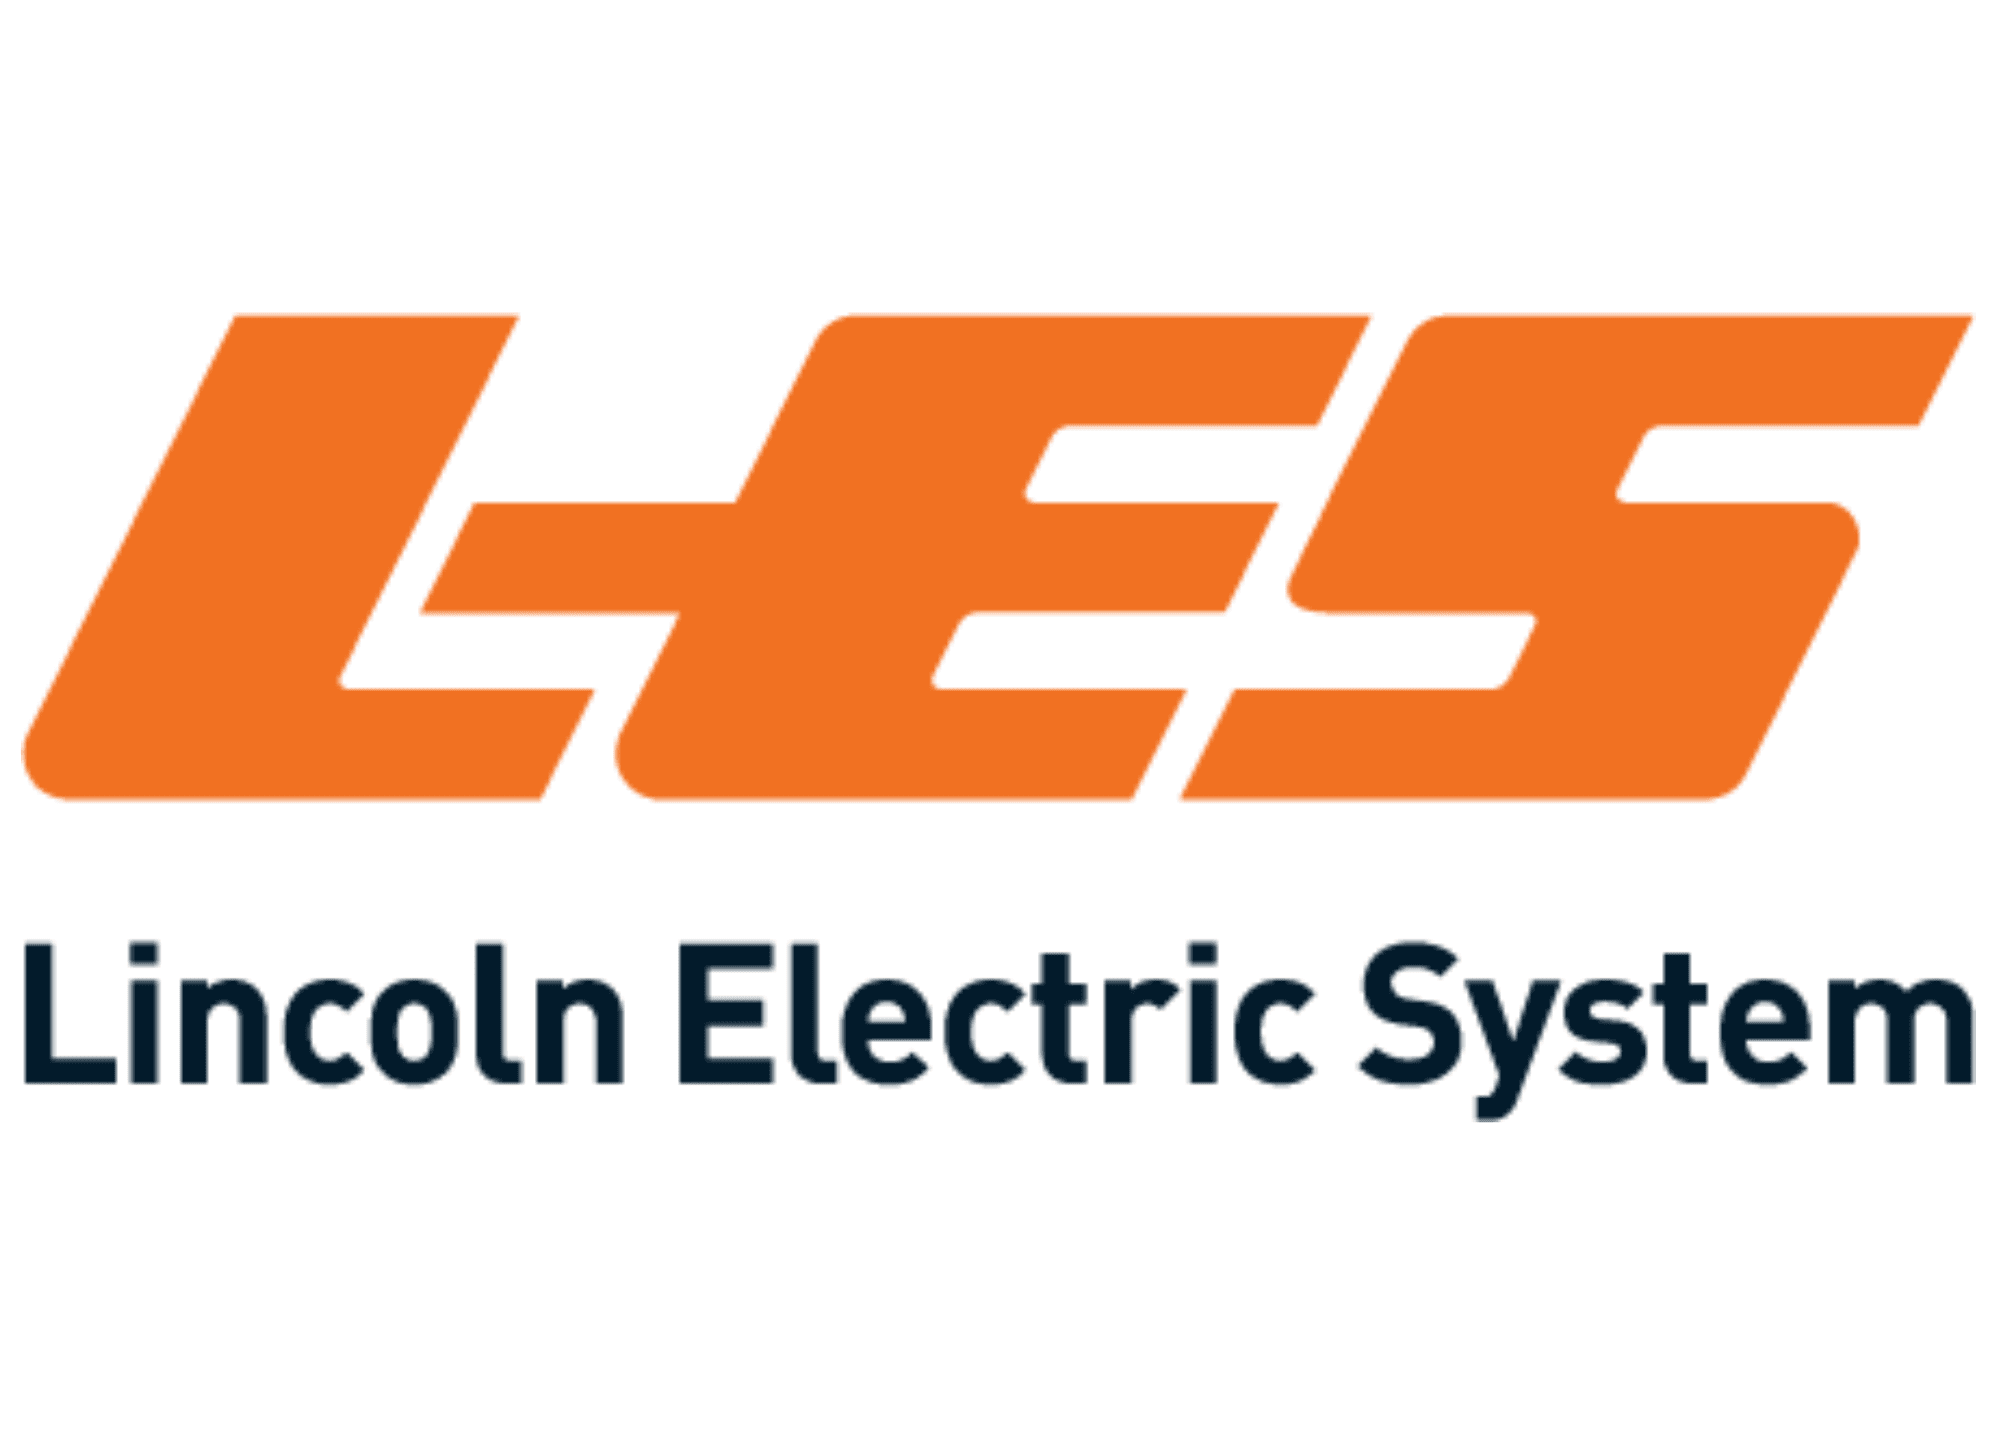 Lincoln Electric System